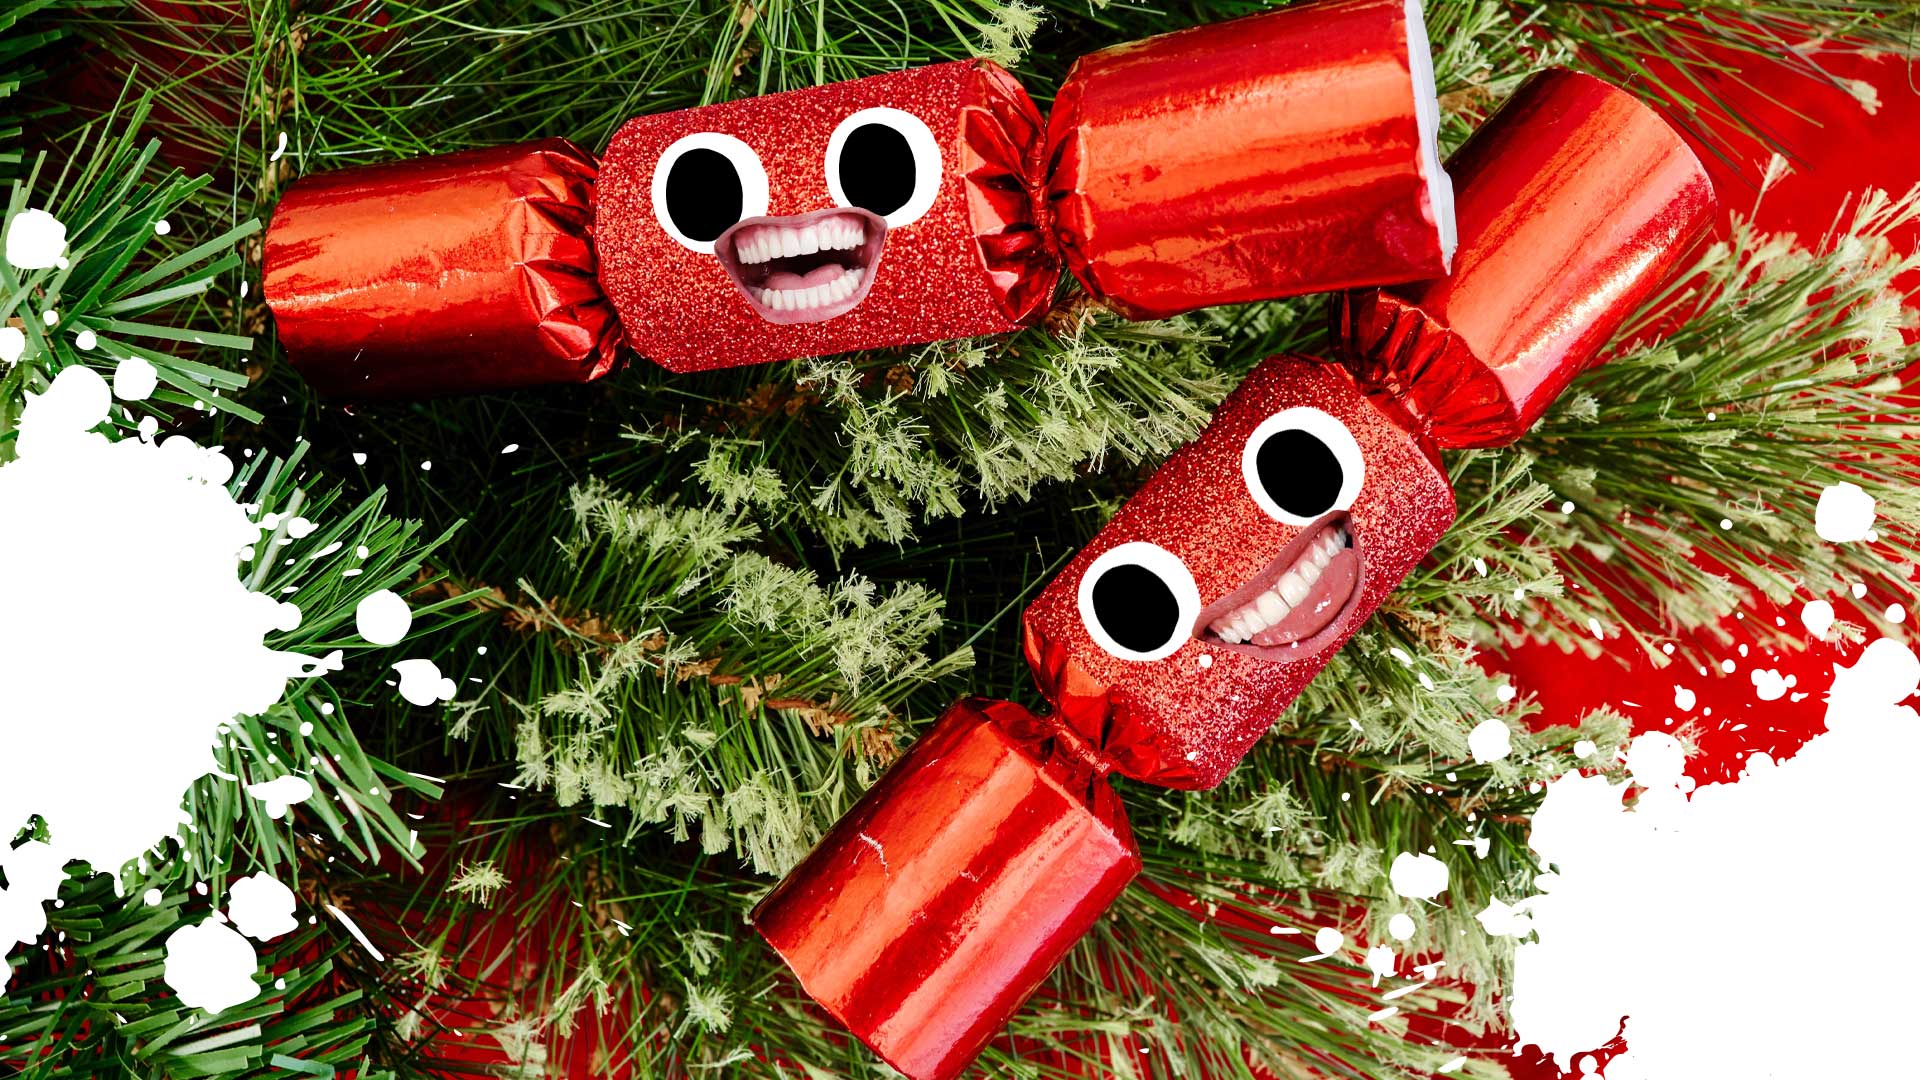 Two Christmas crackers on a tree